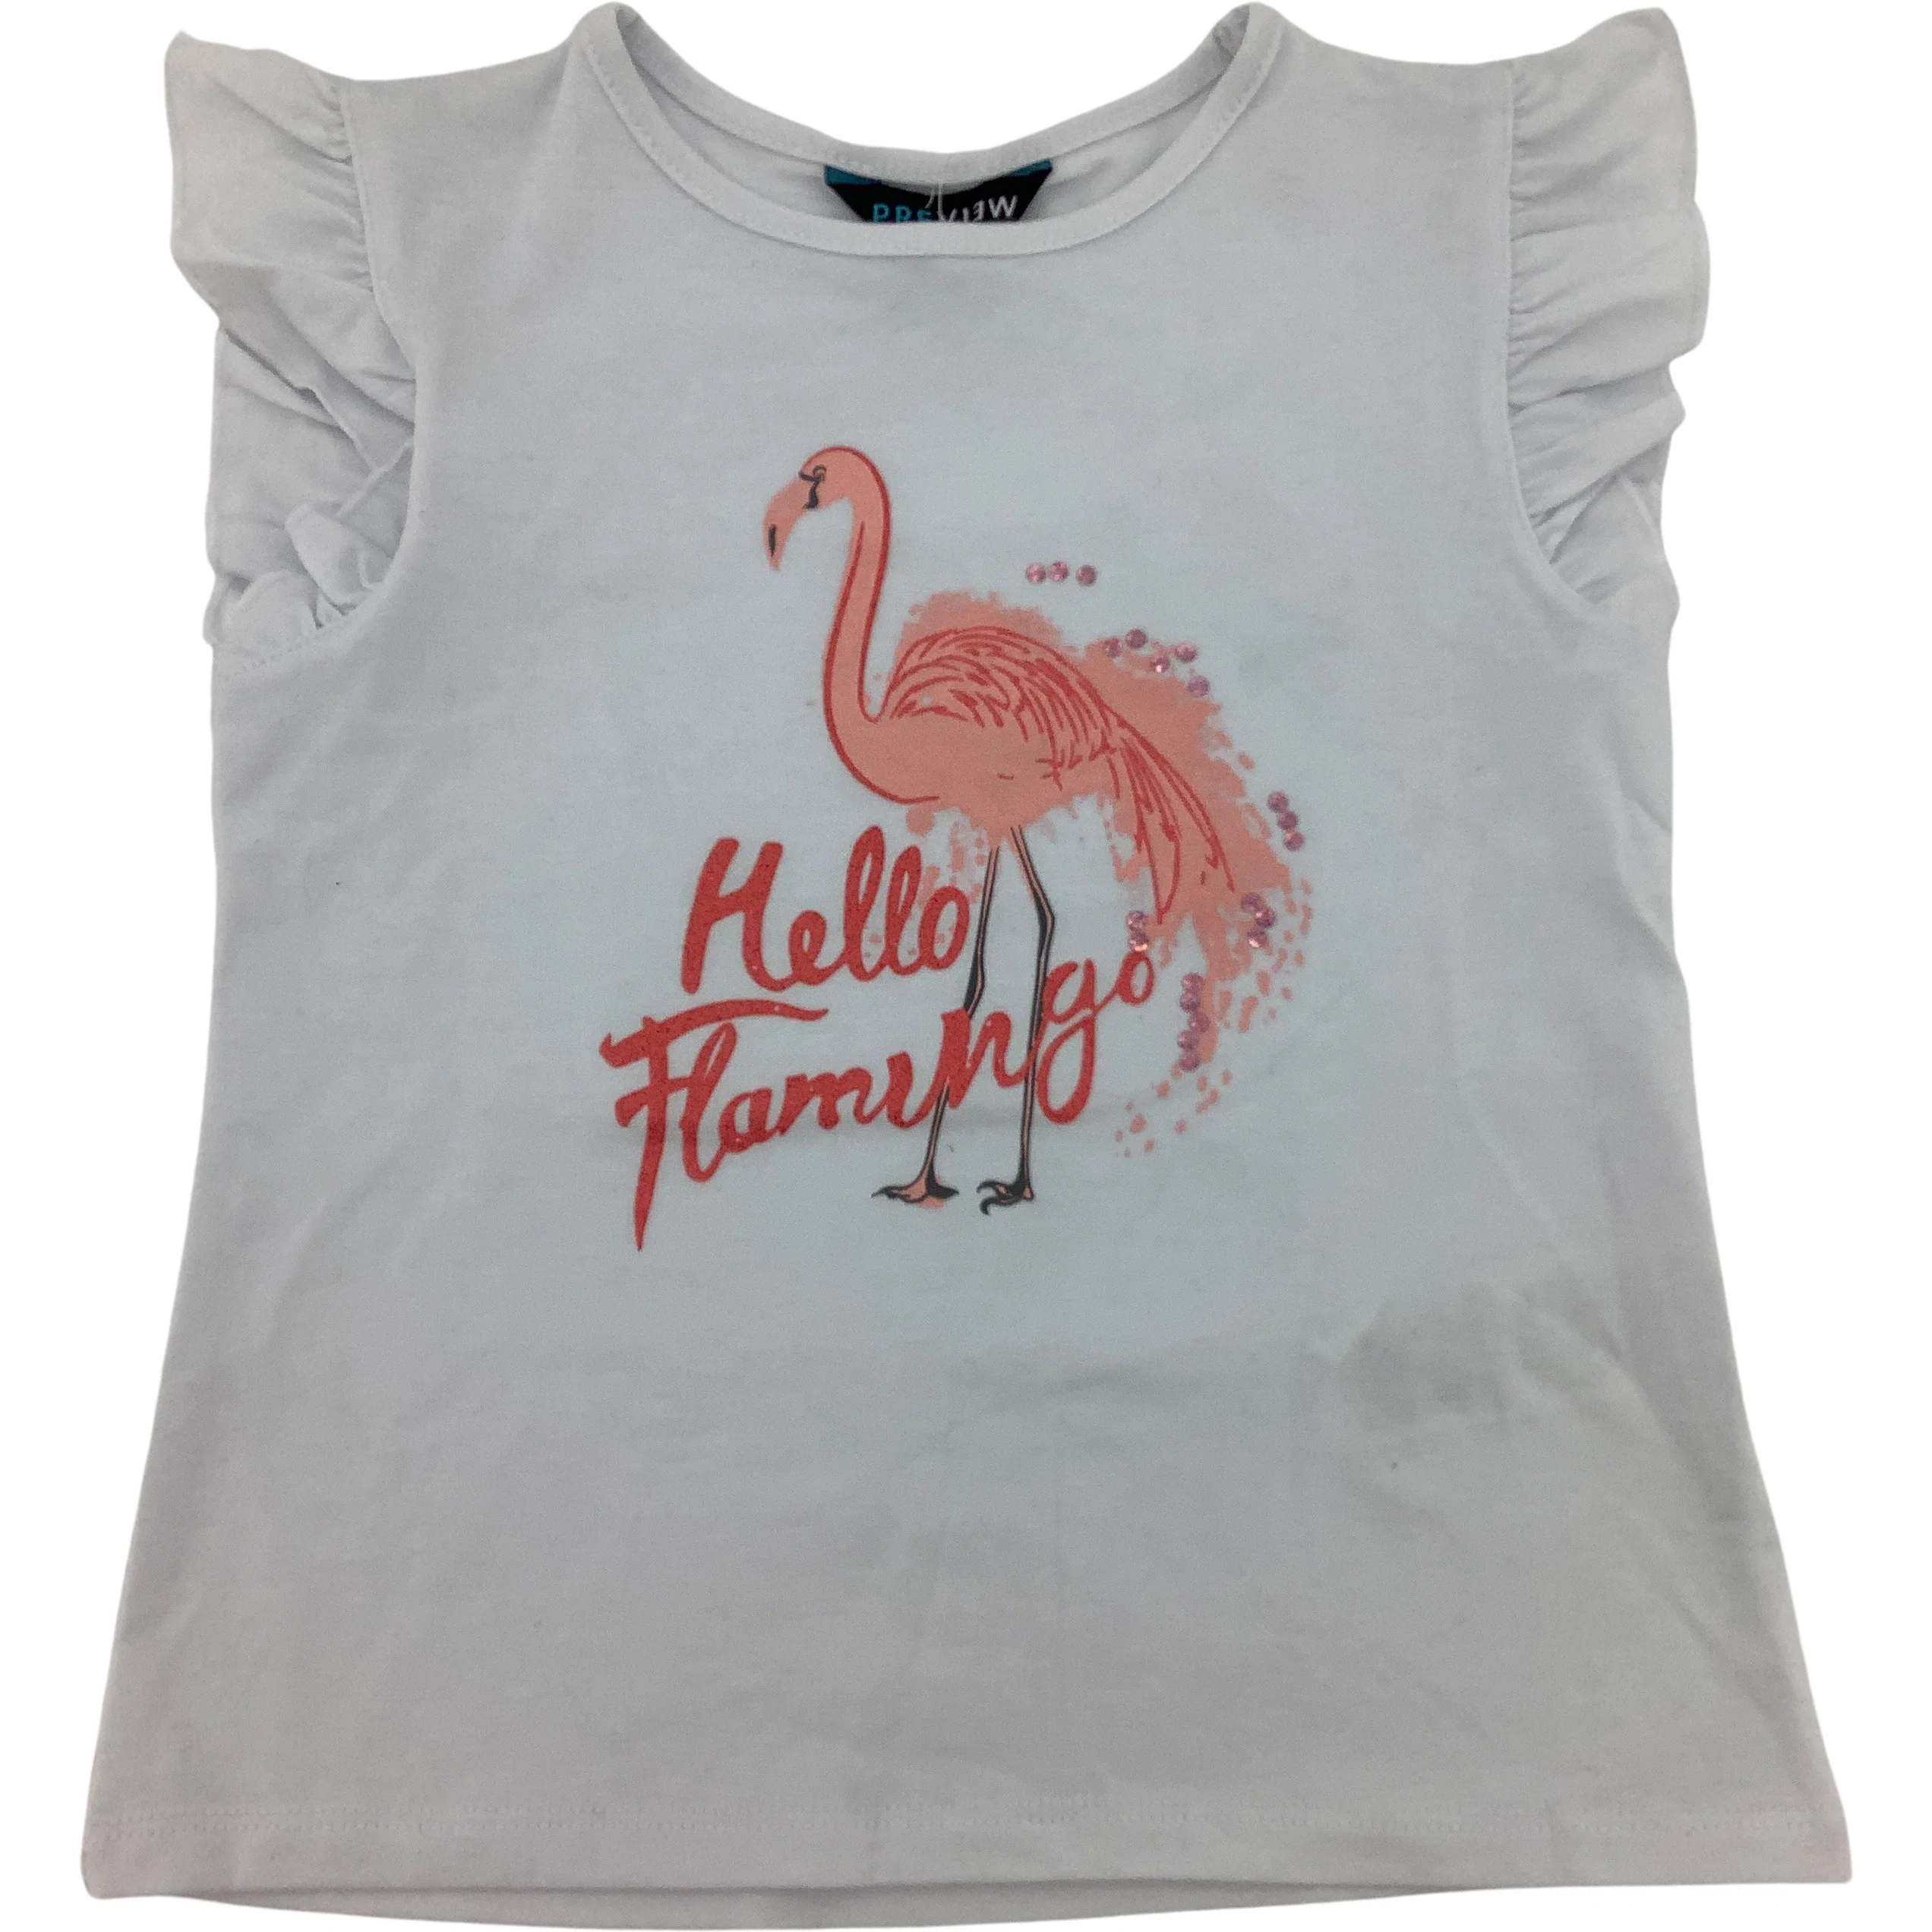 Preview Girl's T-Shirt / White / Flamingo Theme / Kid's Summer Clothes / Size 4